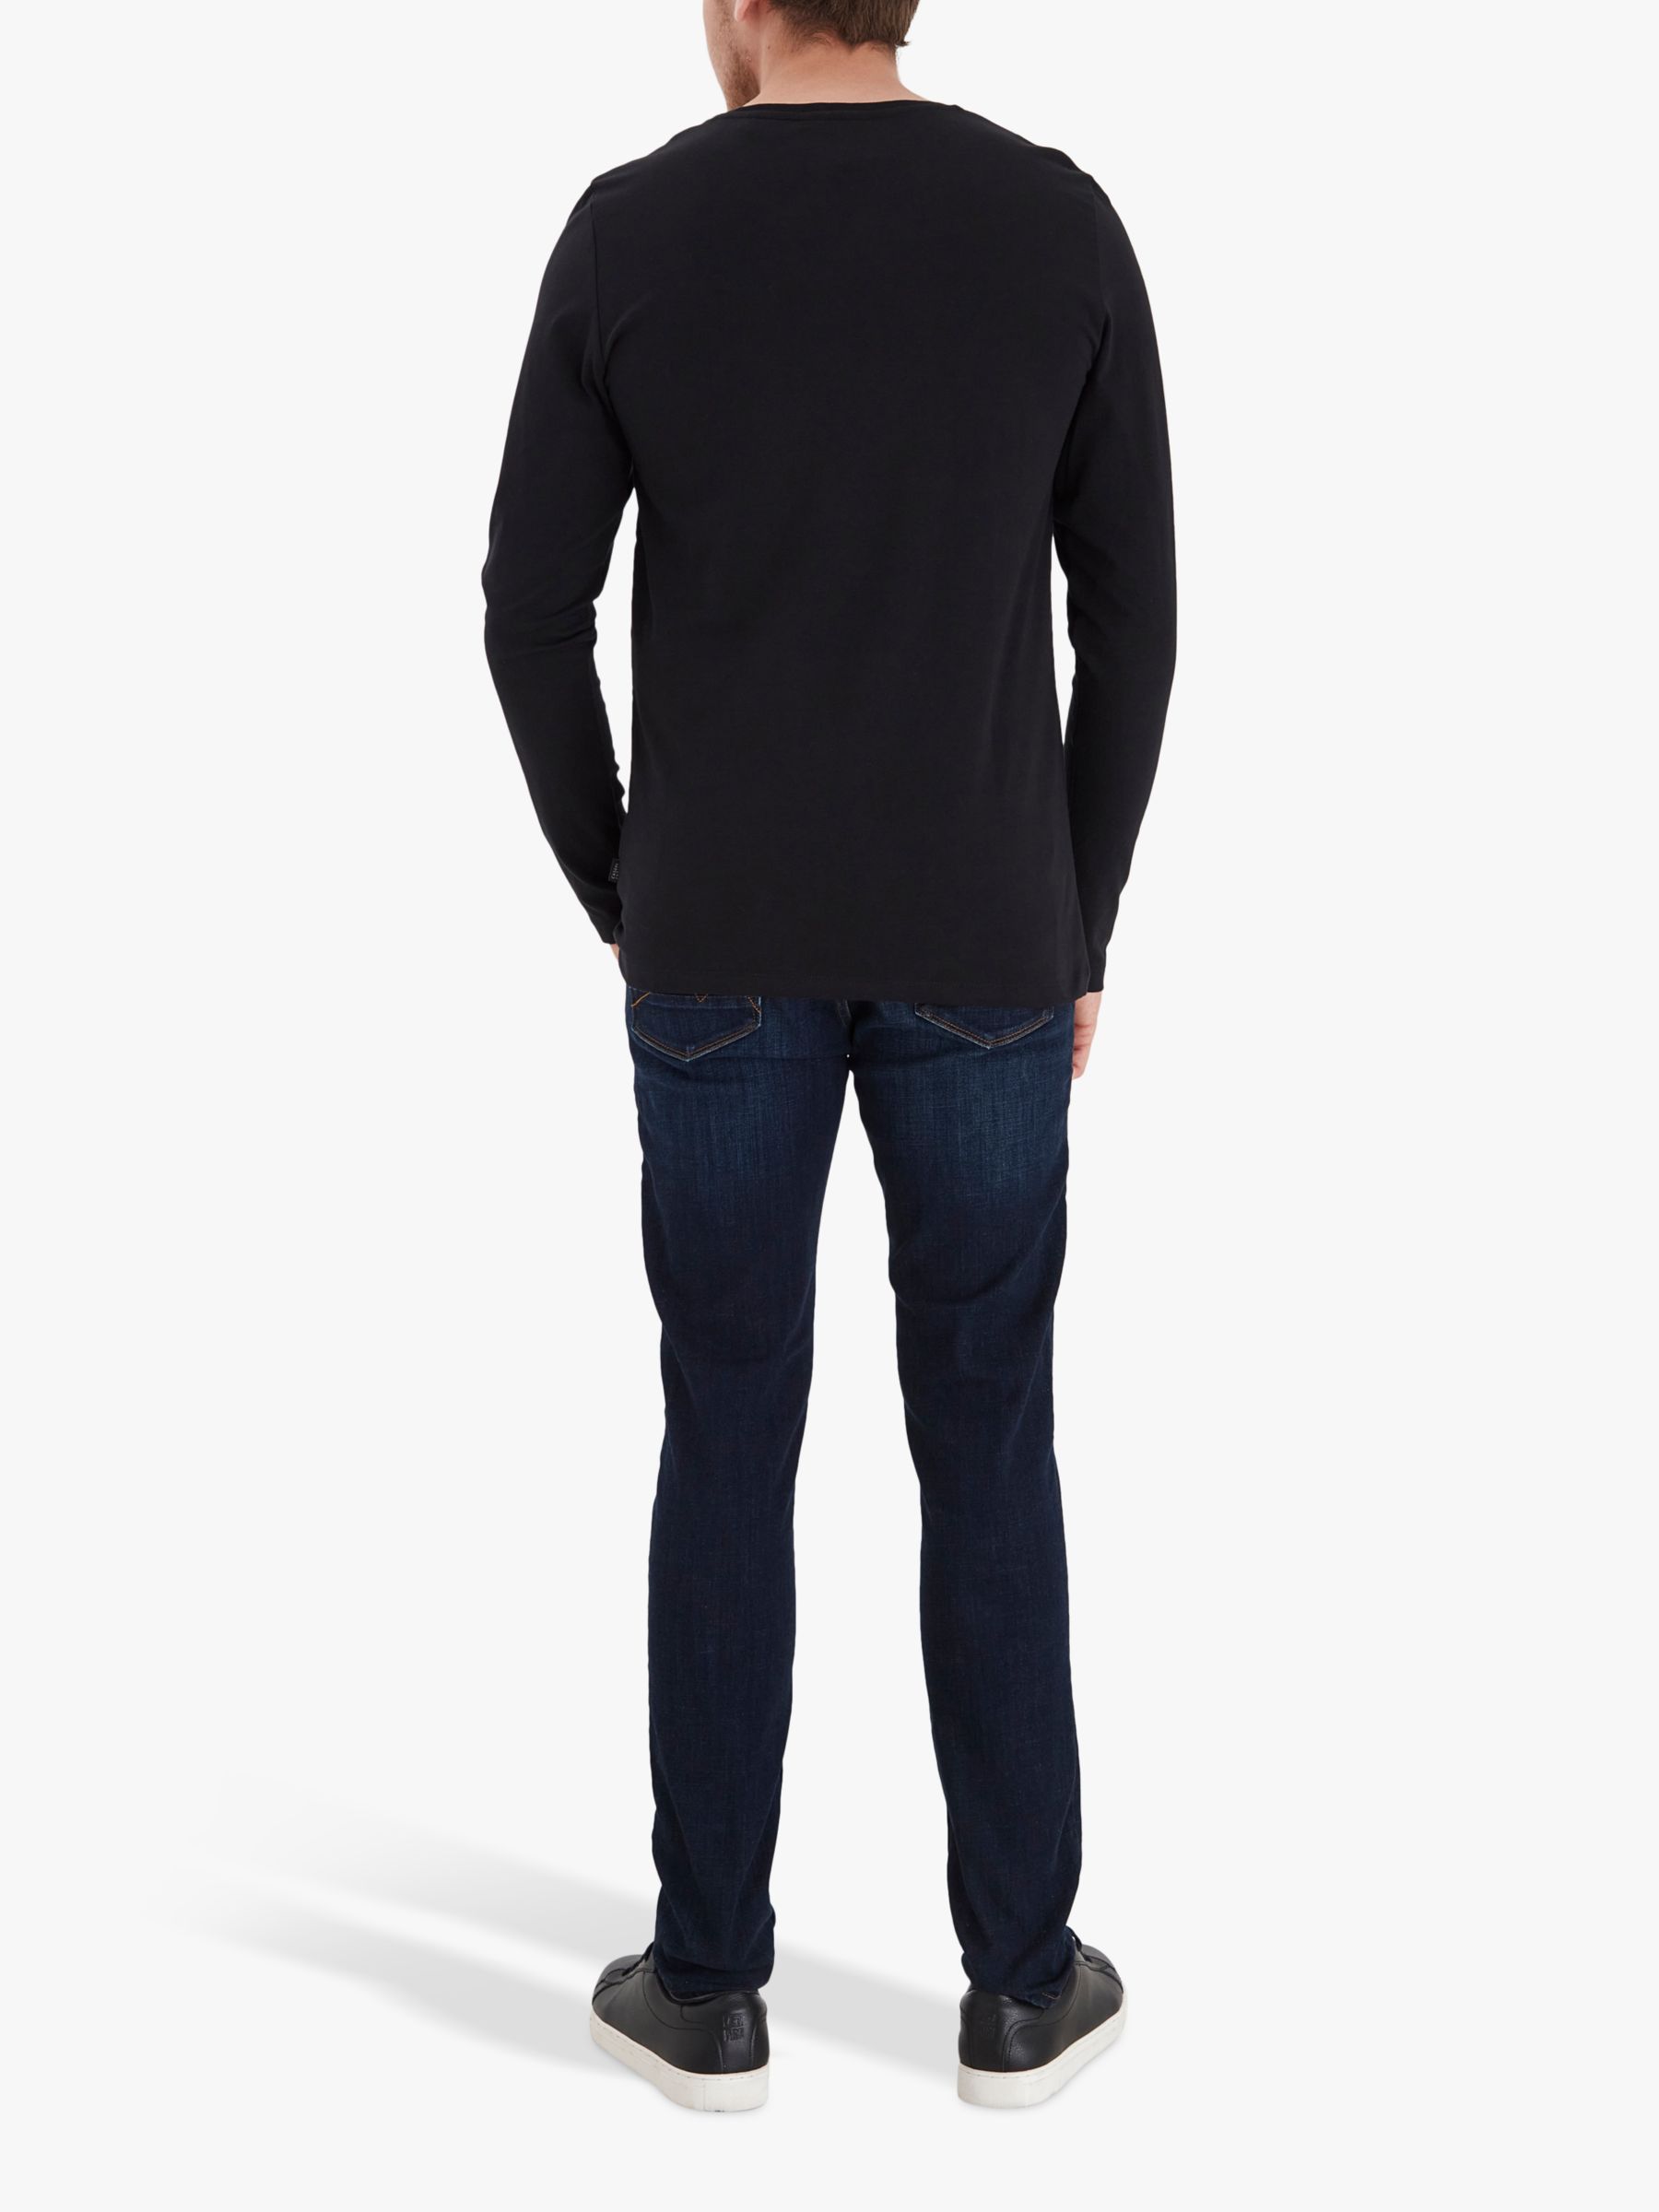 Casual Friday Theo Long Sleeve Basic T-Shirt, Anthracite Black, S